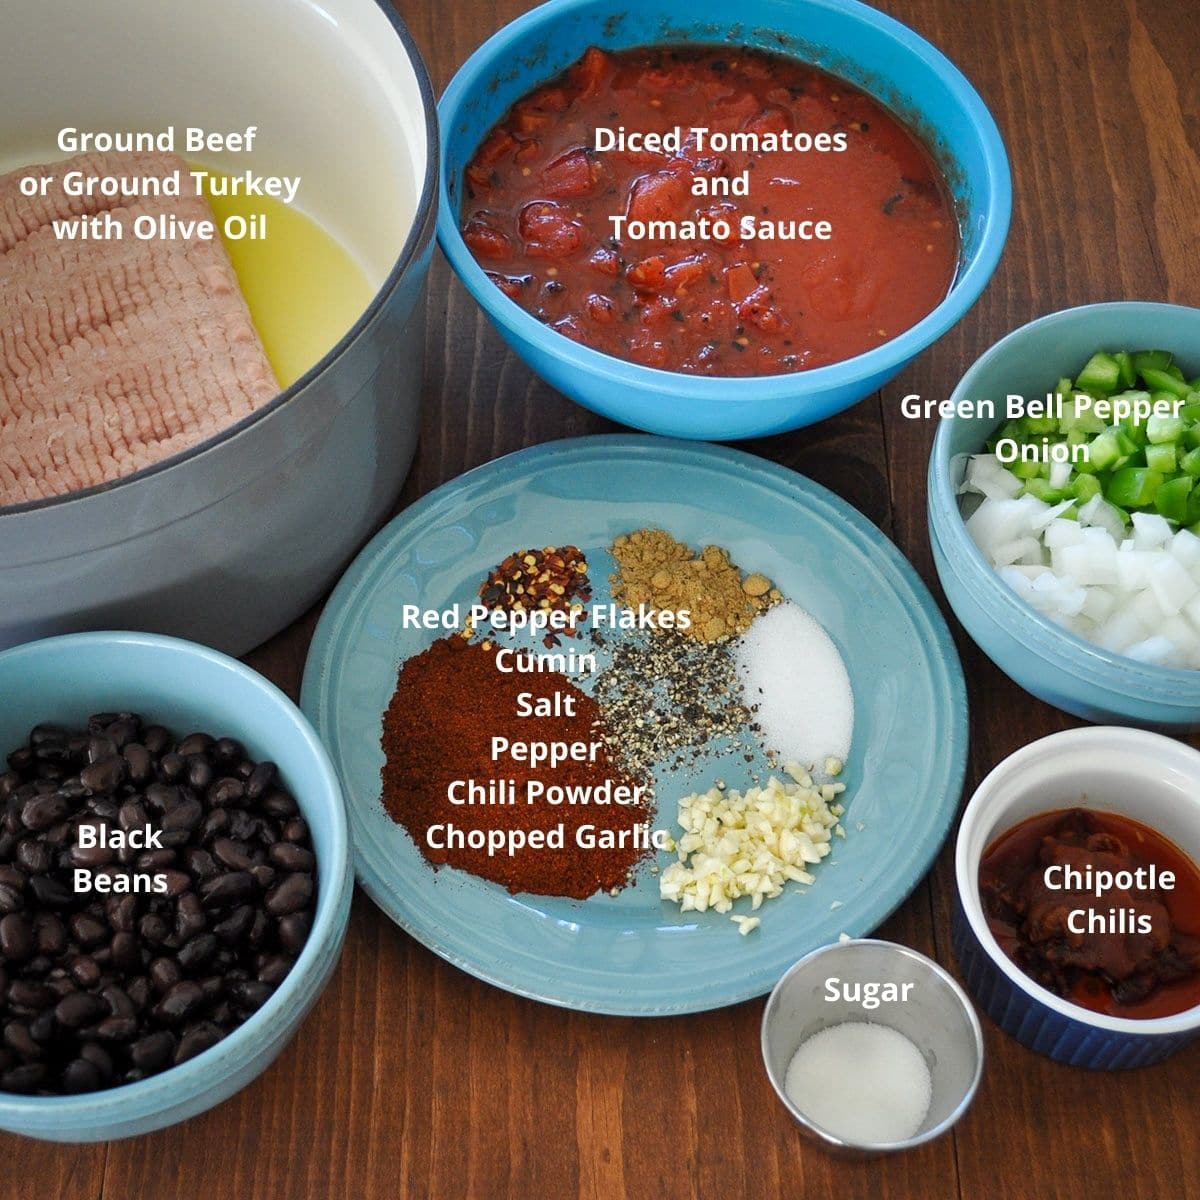 measured out ingredients for chili